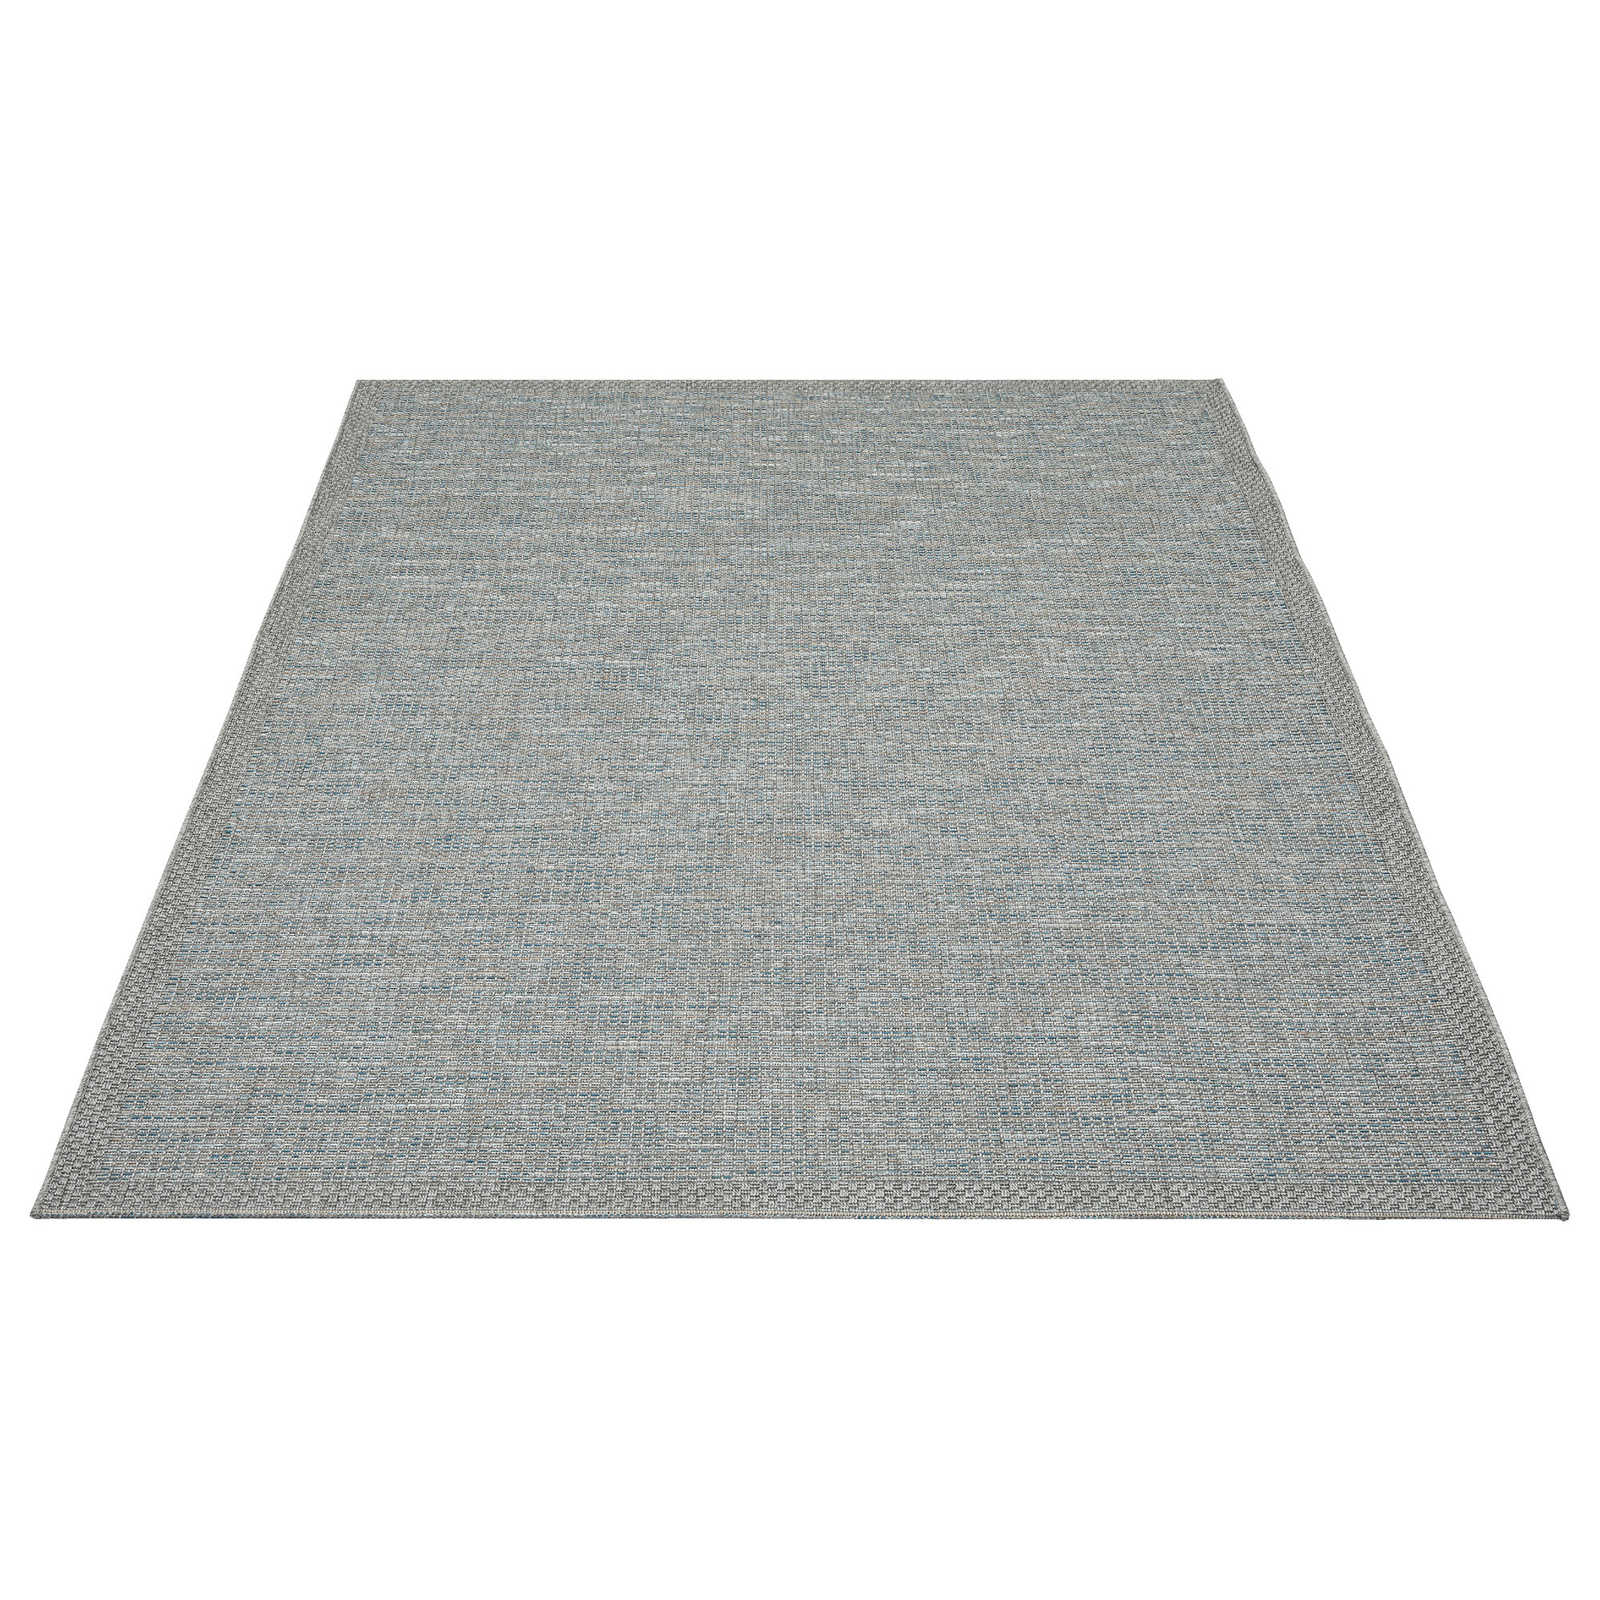 Plain Outdoor Rug in Turquoise - 280 x 200 cm
